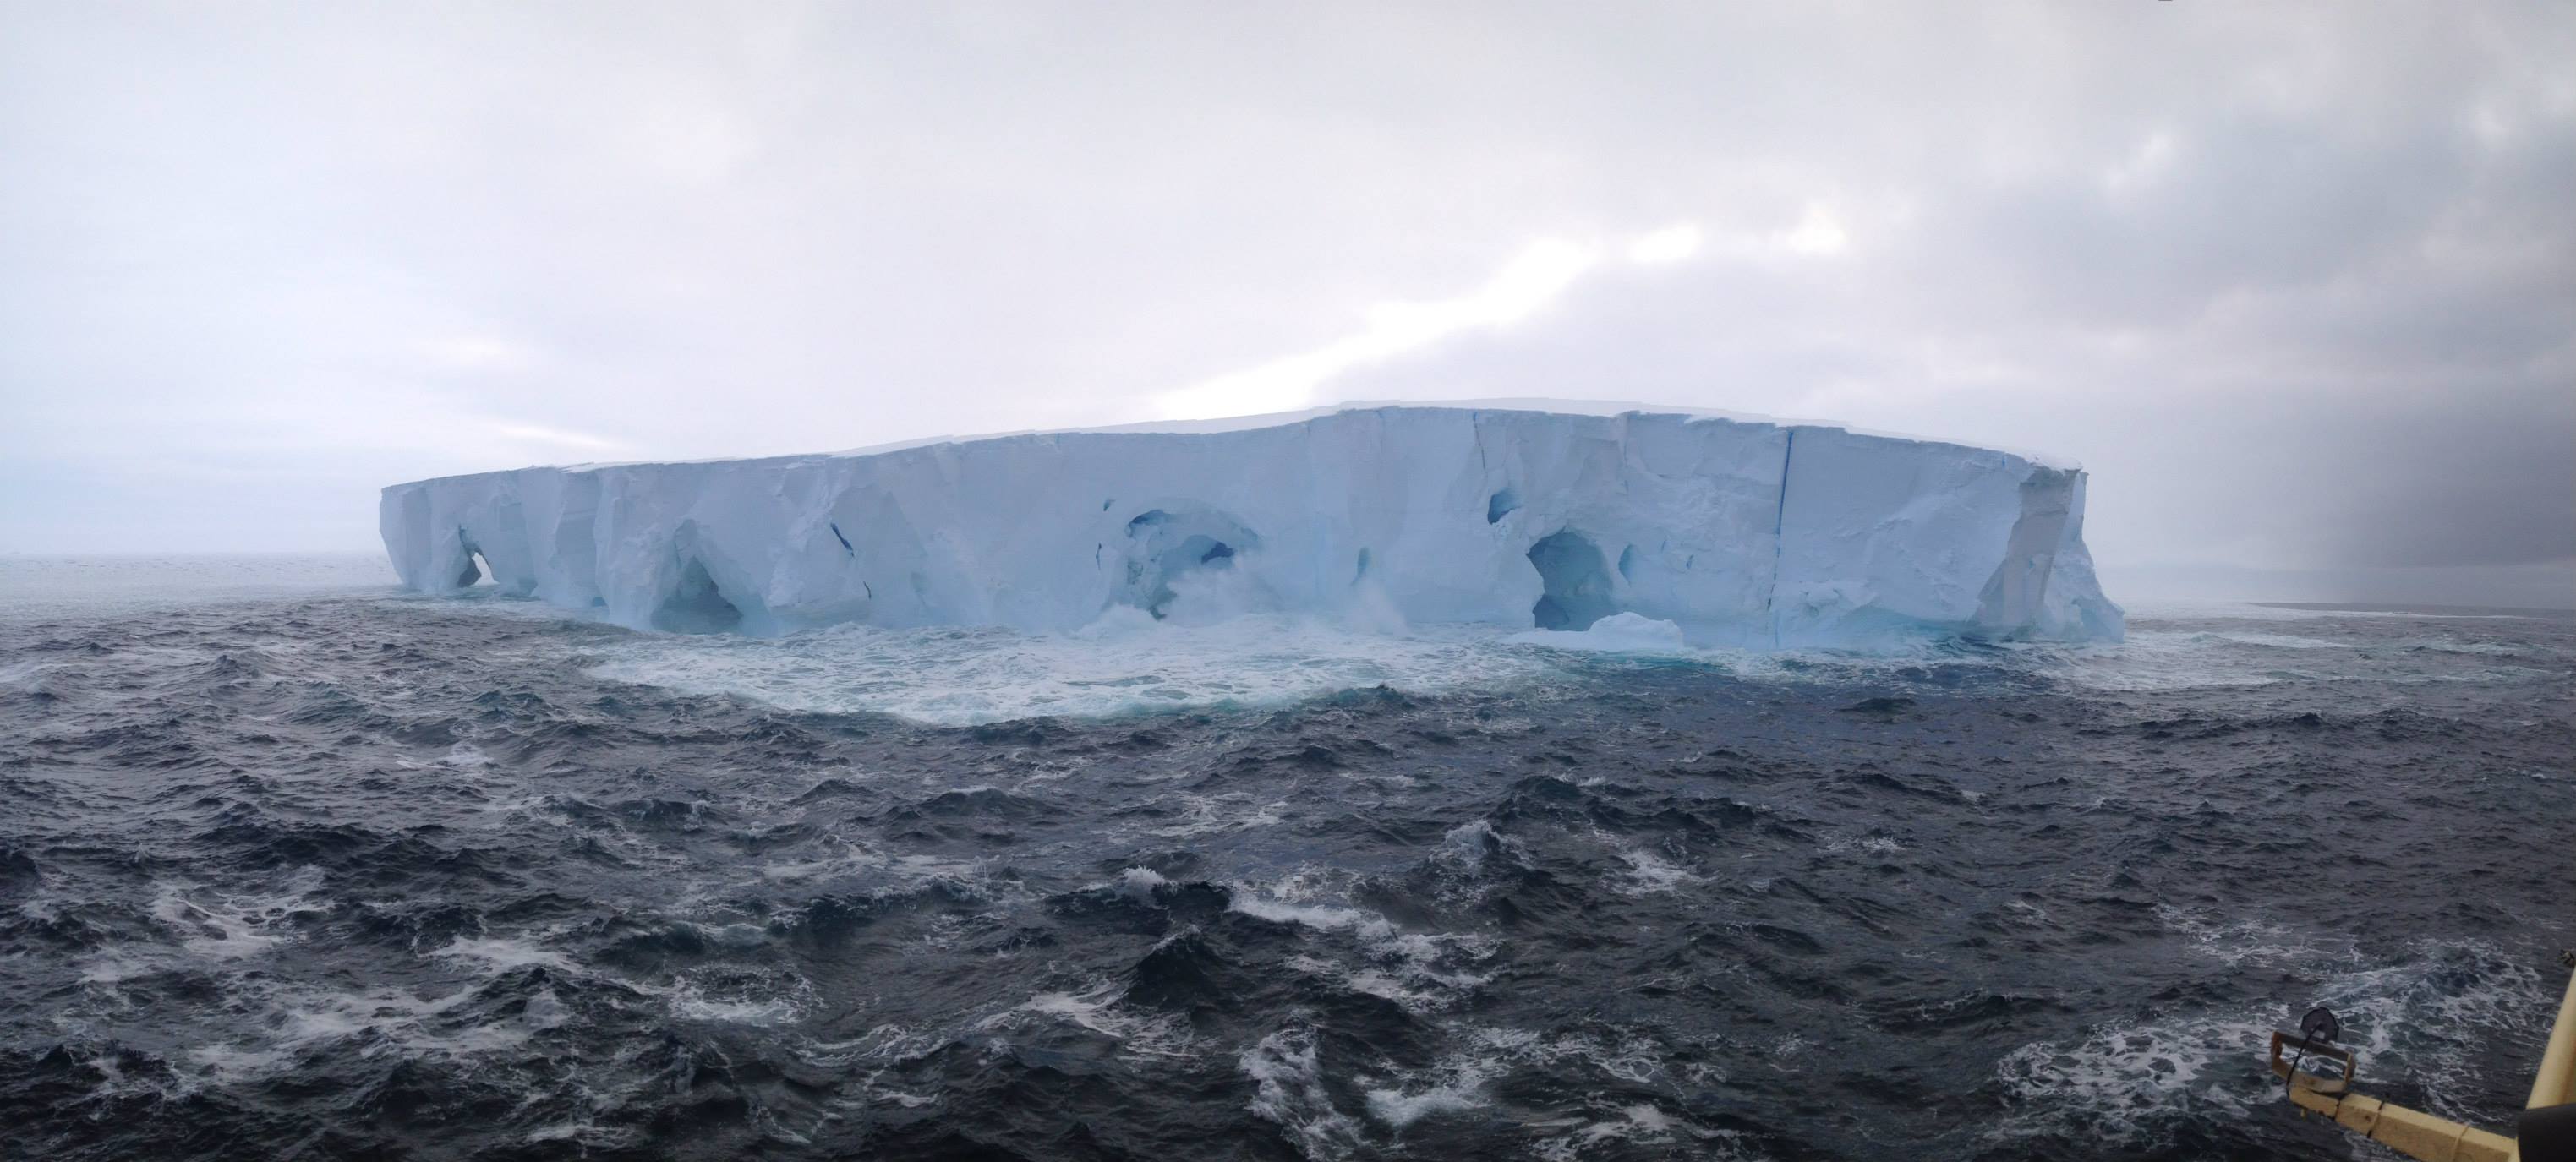 A bright white glacier in the dark blue choppy waters of Antarctica against a cloudy sky.